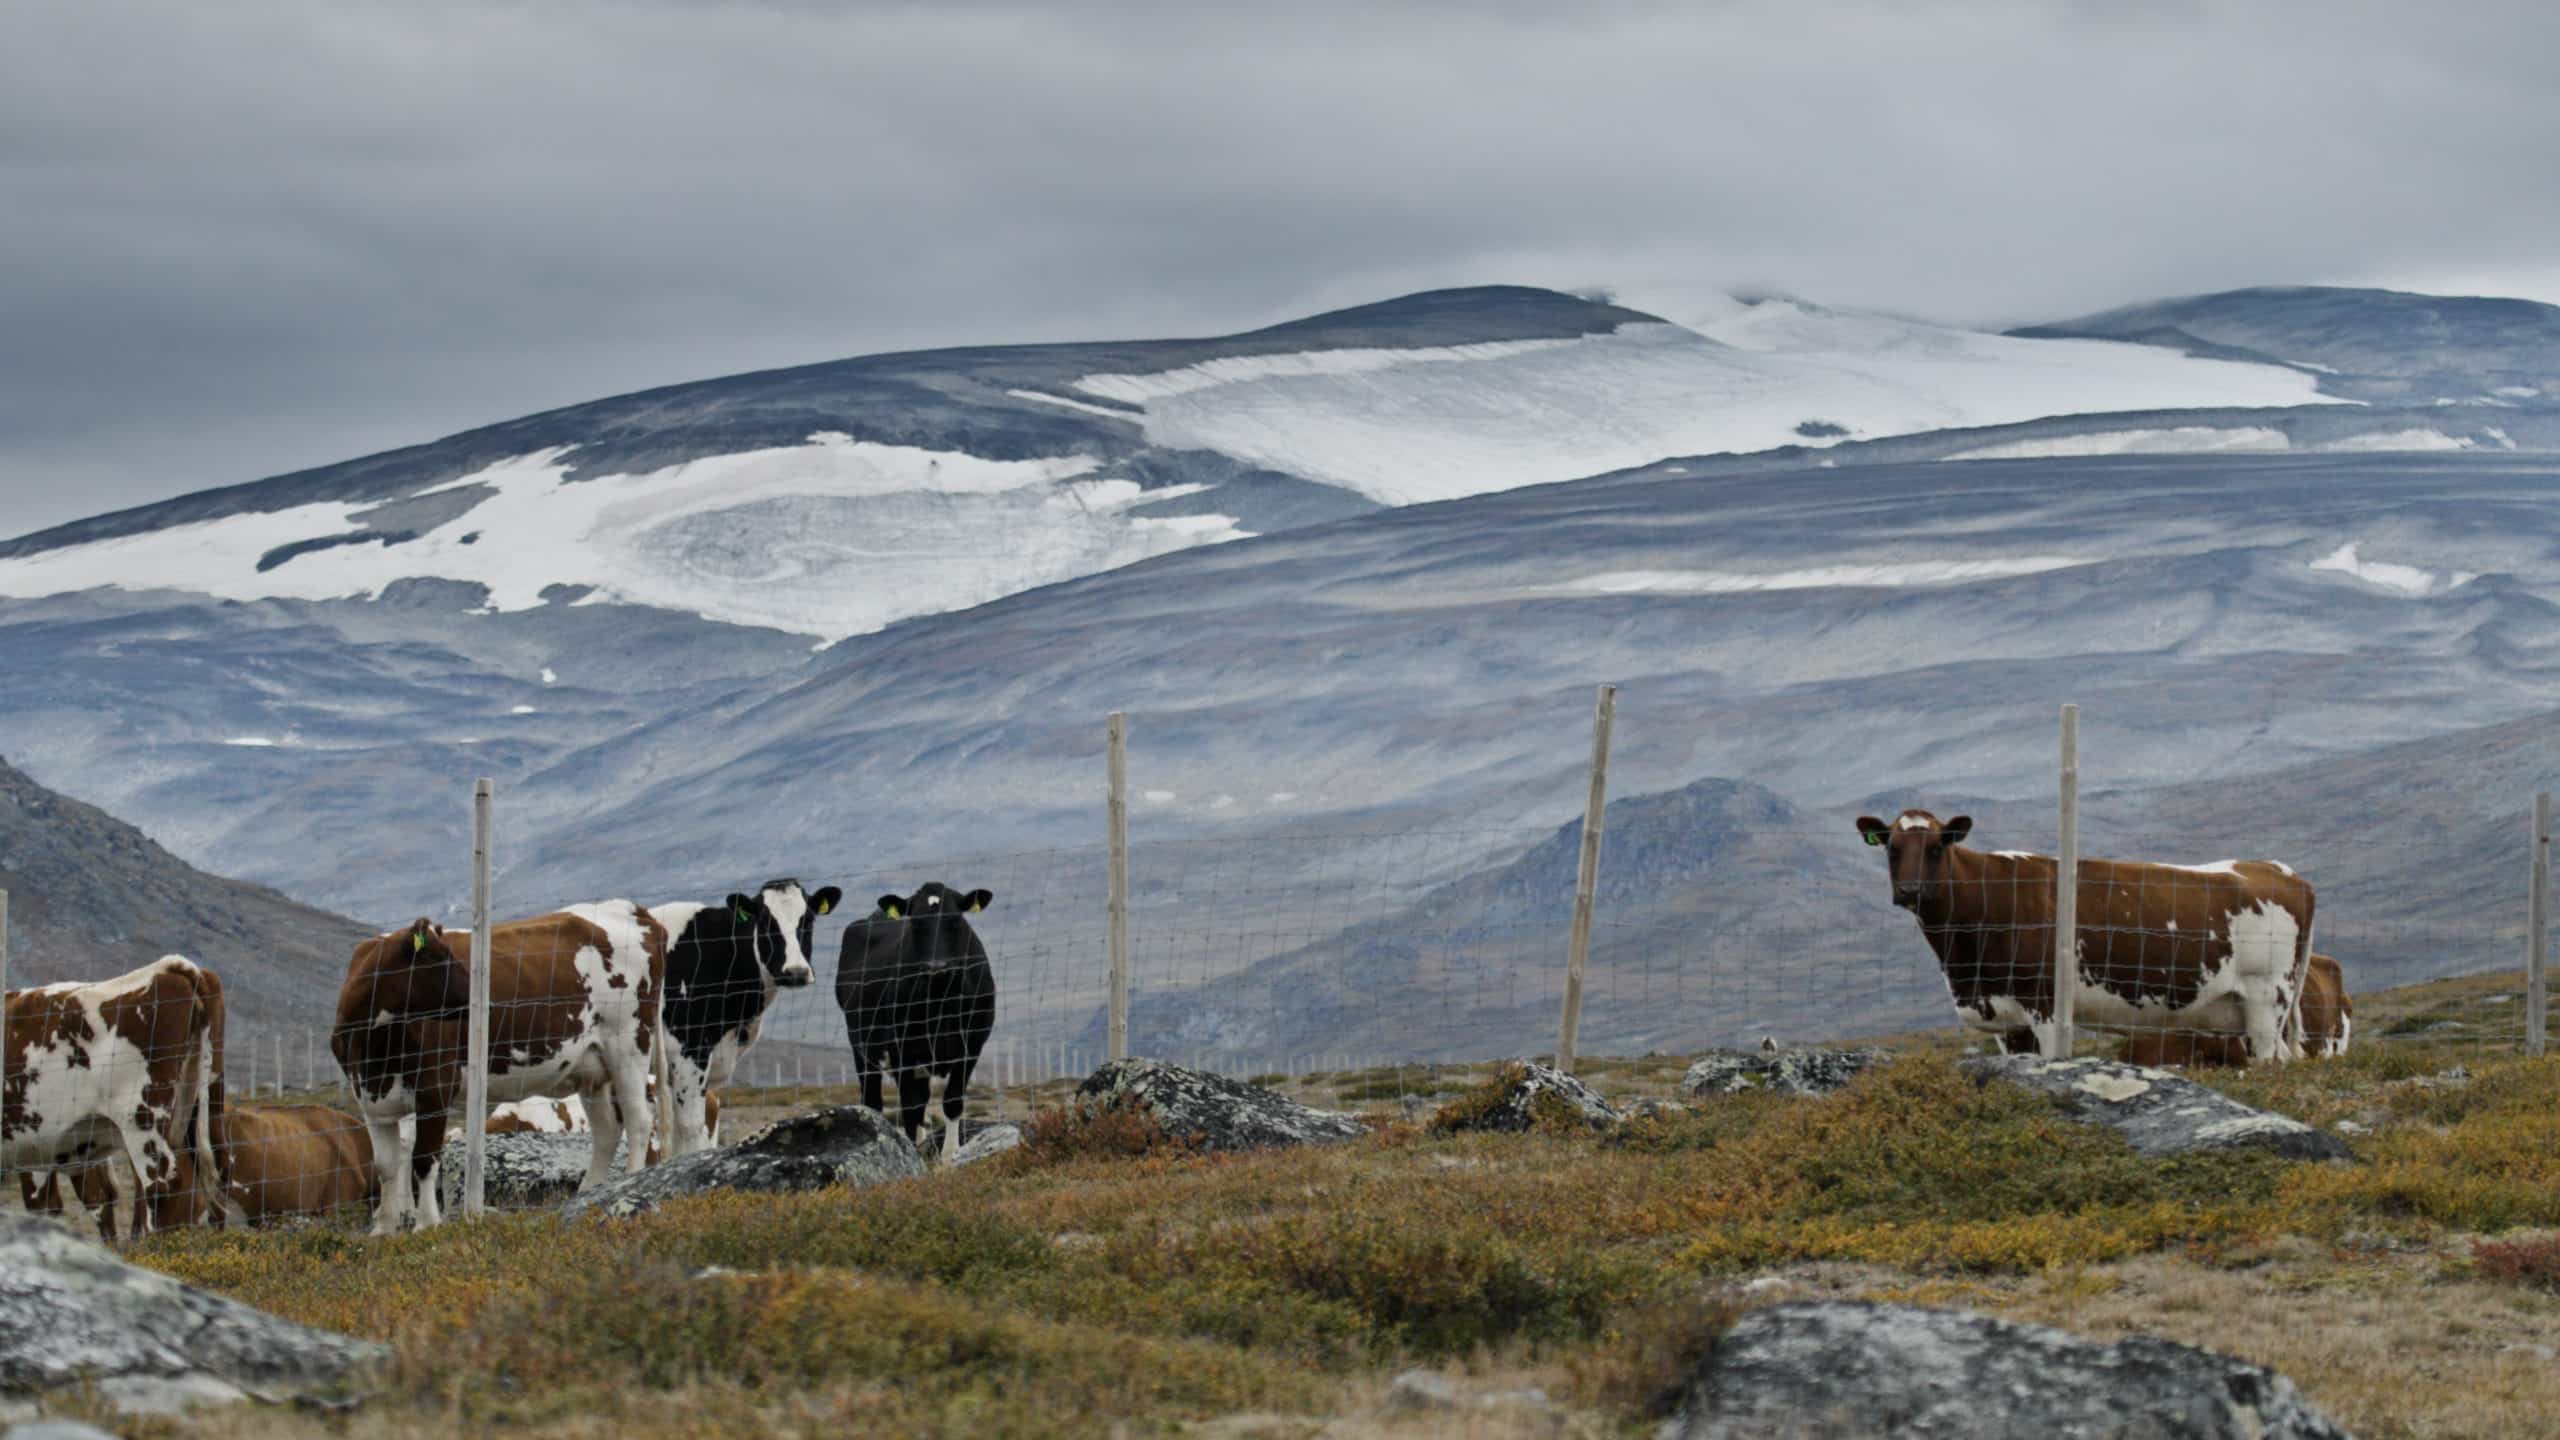 Cows on mountain pasture behind a fence in front of tall snow covered mountains.